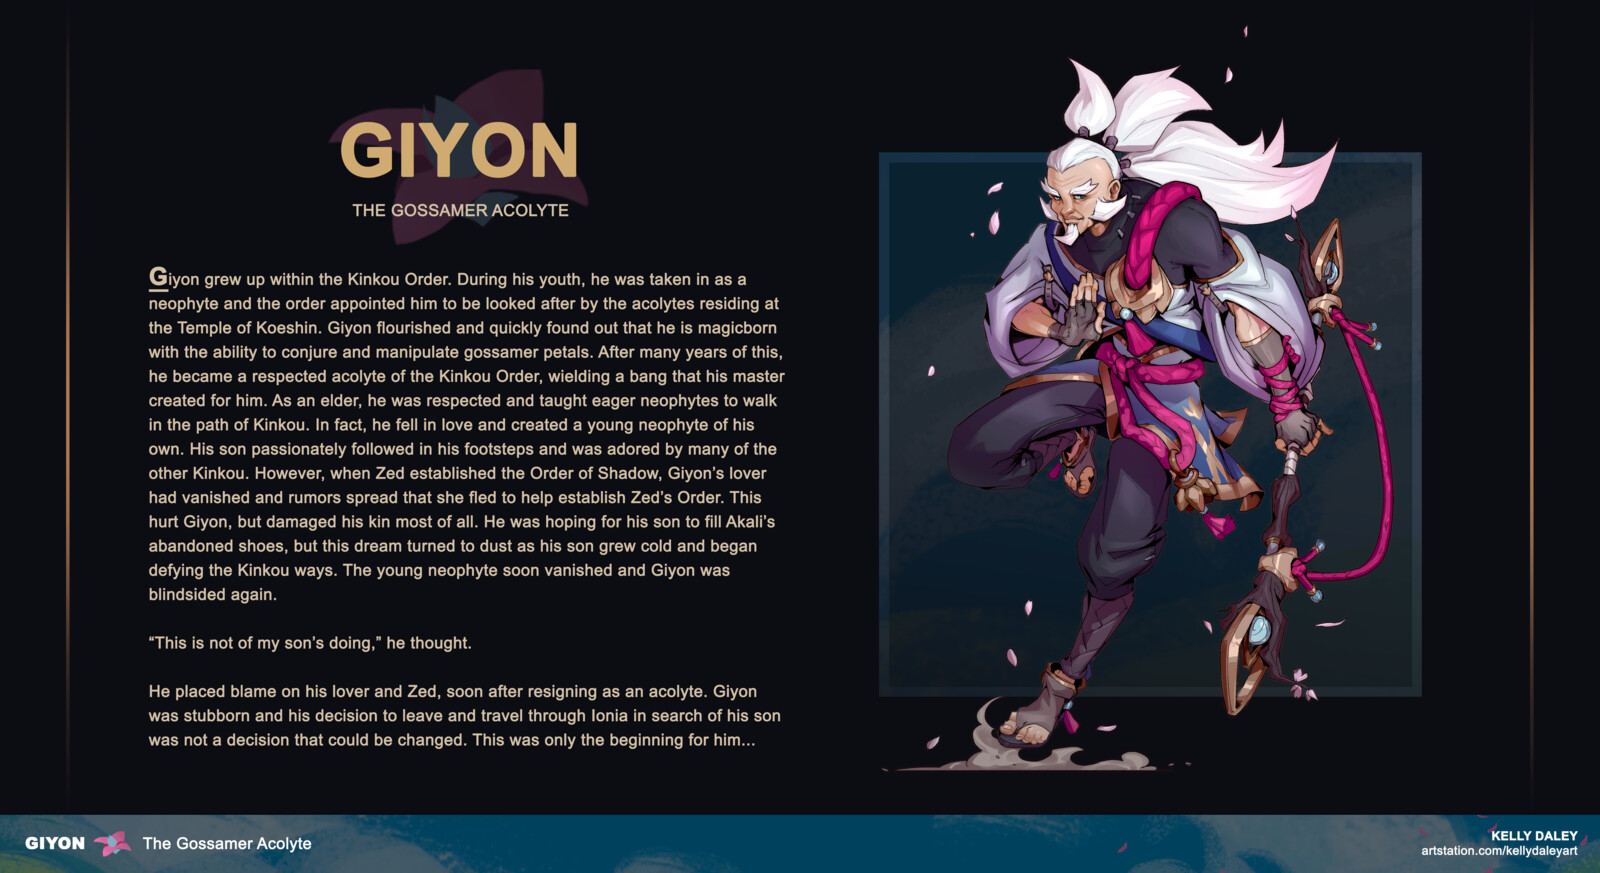 Final Render + story exerpt for Giyon. 